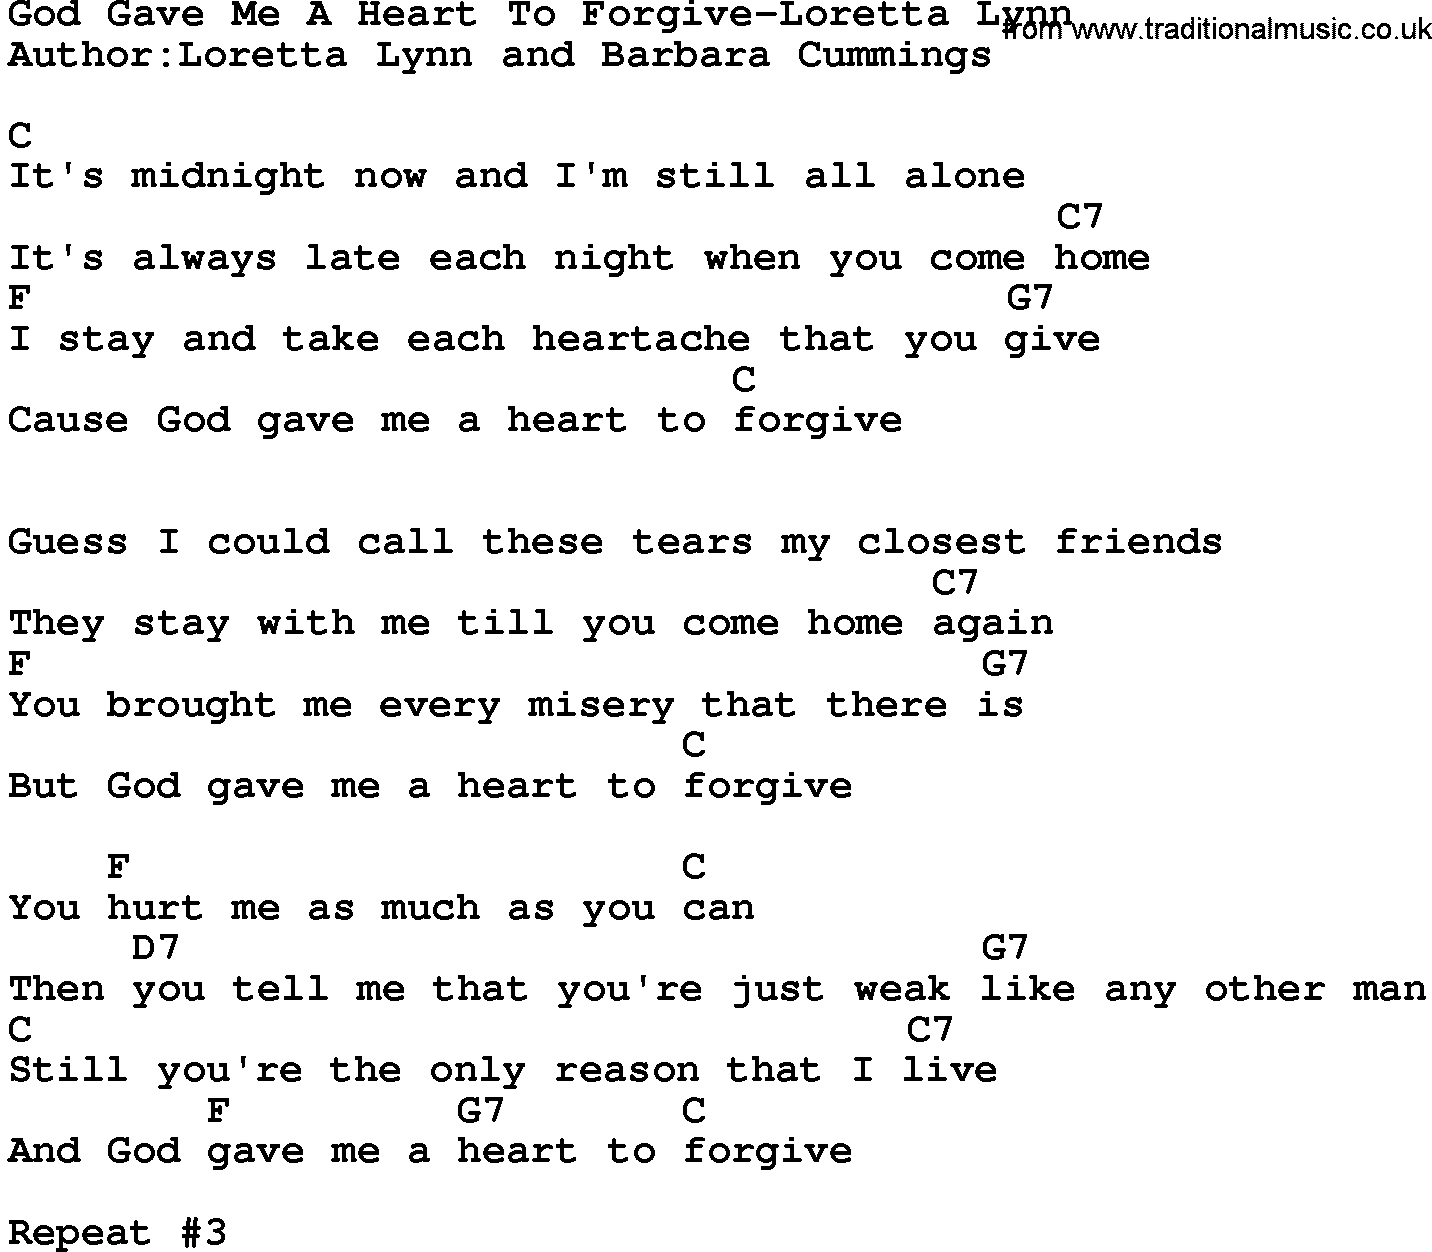 Country music song: God Gave Me A Heart To Forgive-Loretta Lynn lyrics and chords